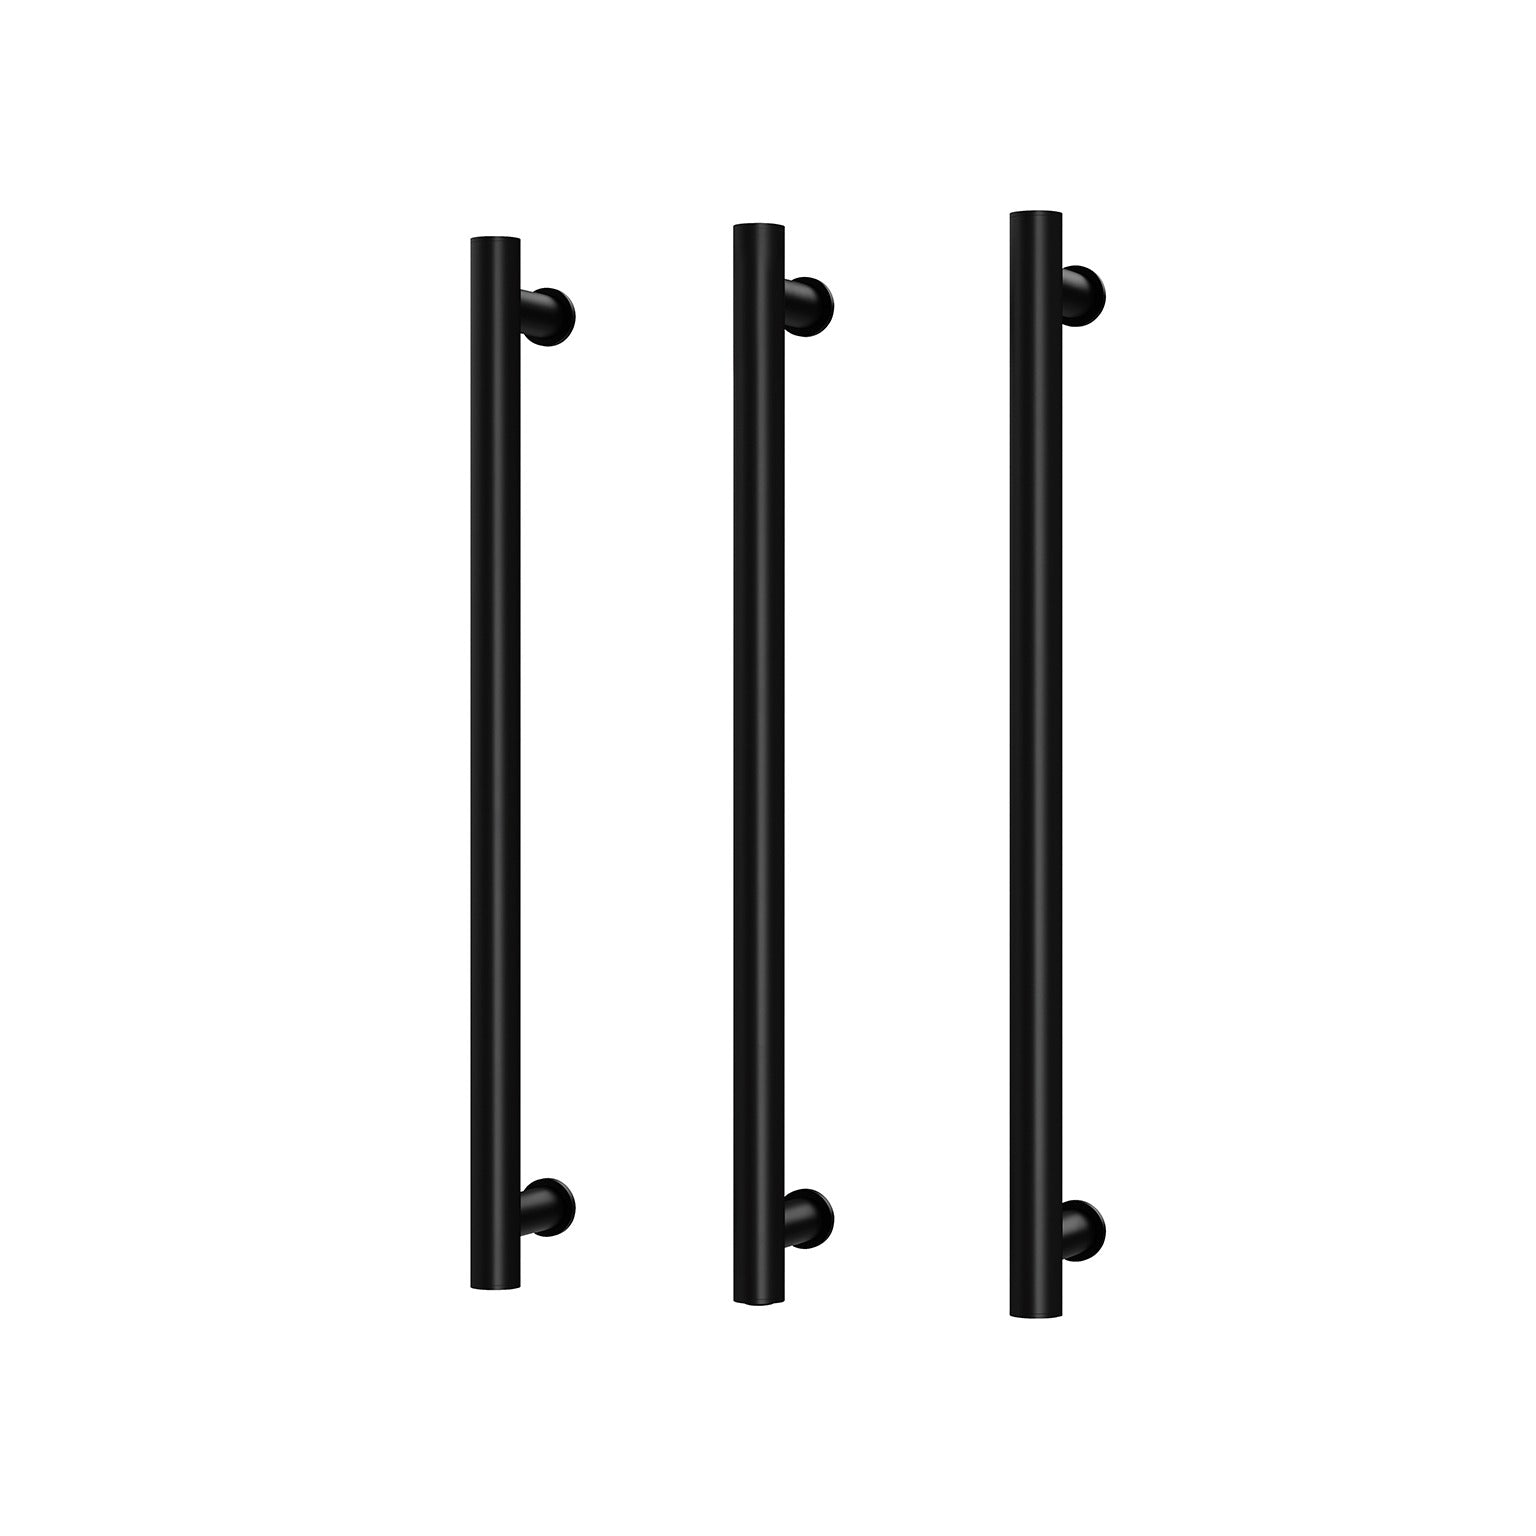 PHOENIX ROUND TRIPLE HEATED TOWEL RAIL MATTE BLACK (AVAILABLE IN 600MM AND 800MM)